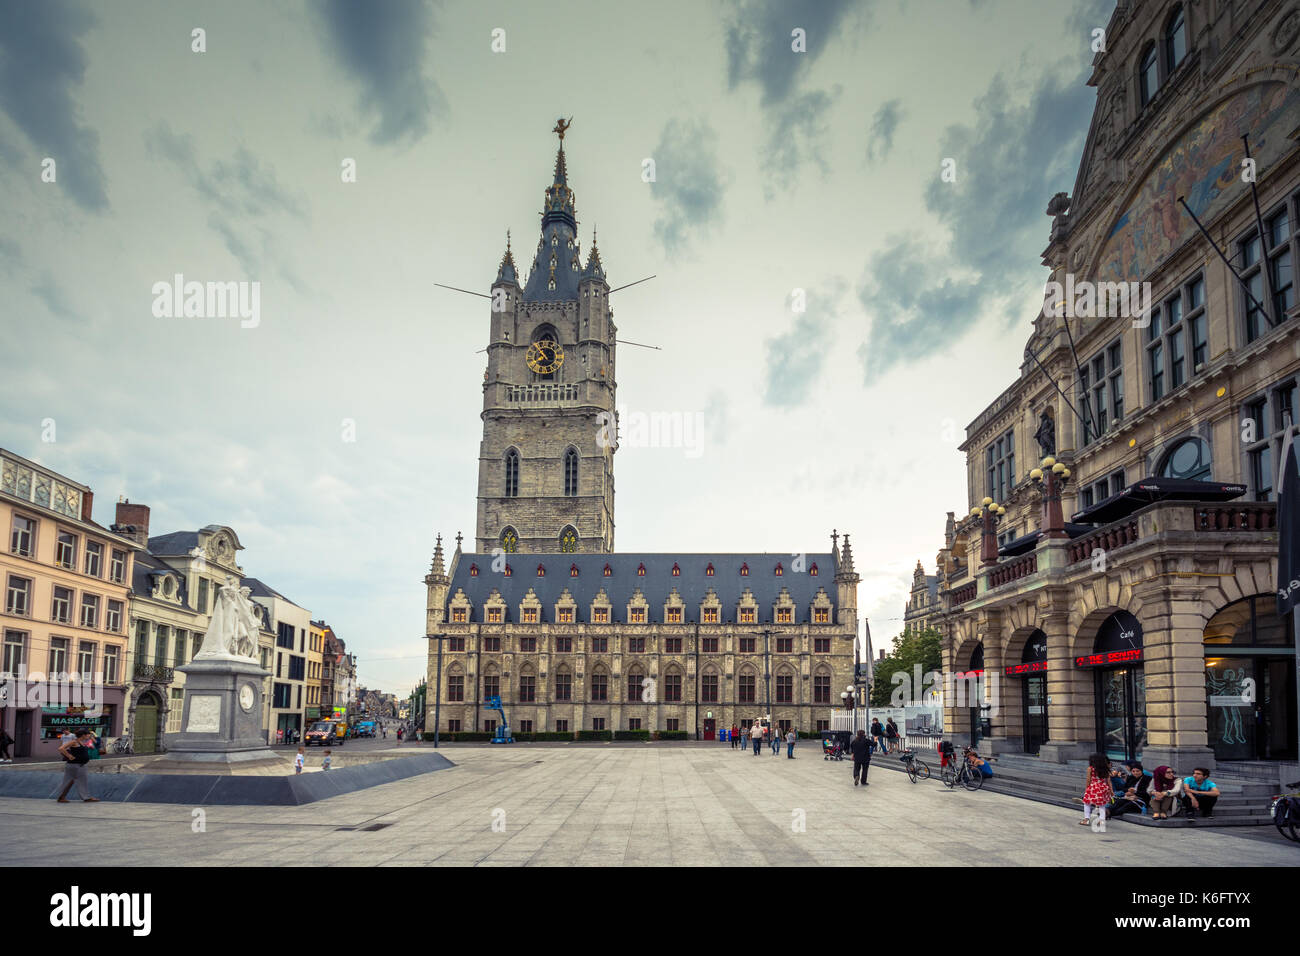 Ghent's old city center scenic place - Ghent, Belgium Stock Photo